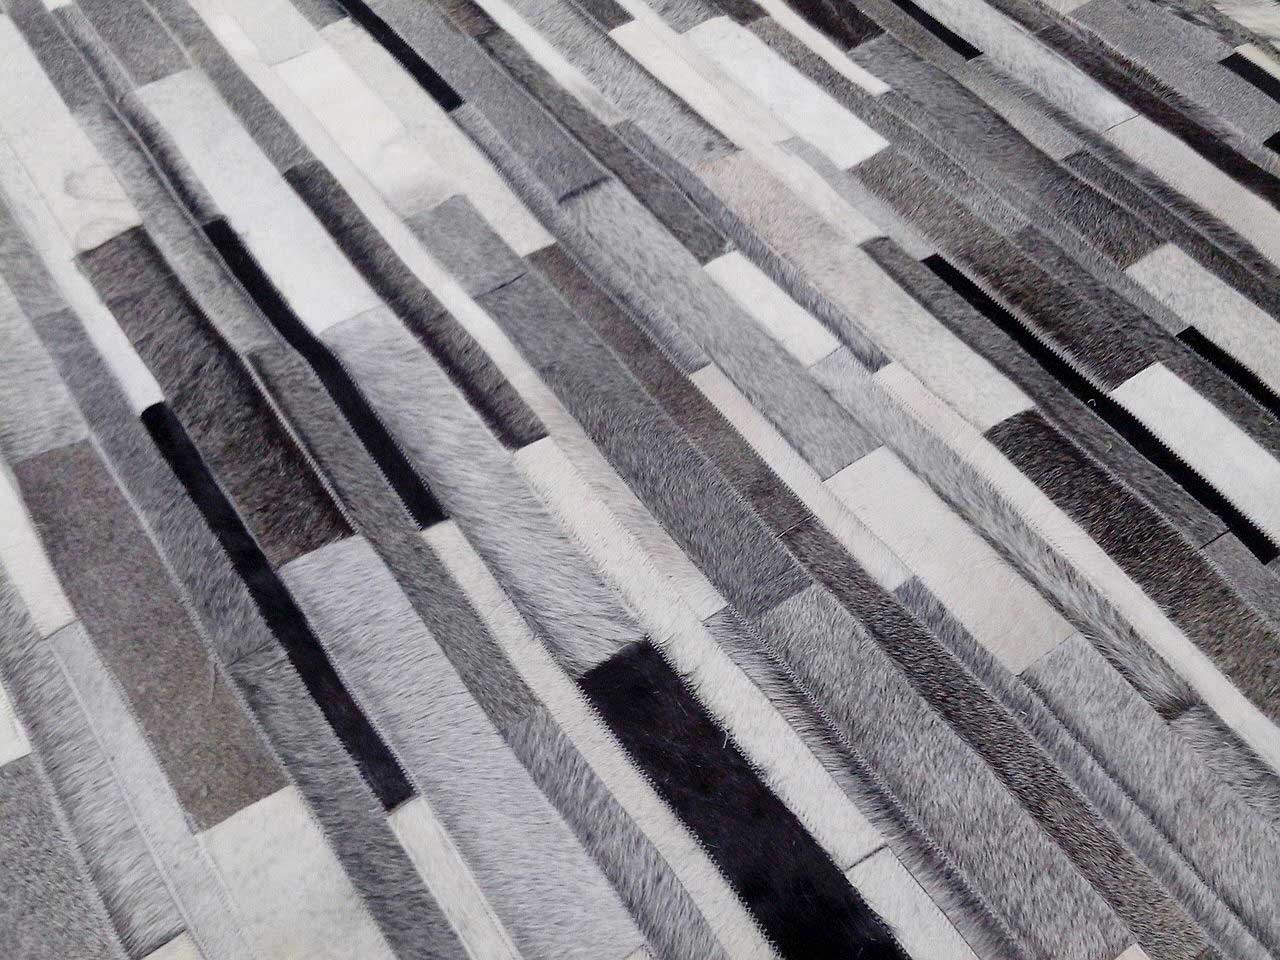 Custom striped patchwork cowhide rug for Jonathan. He wanted a full range, from white to black and everything in between